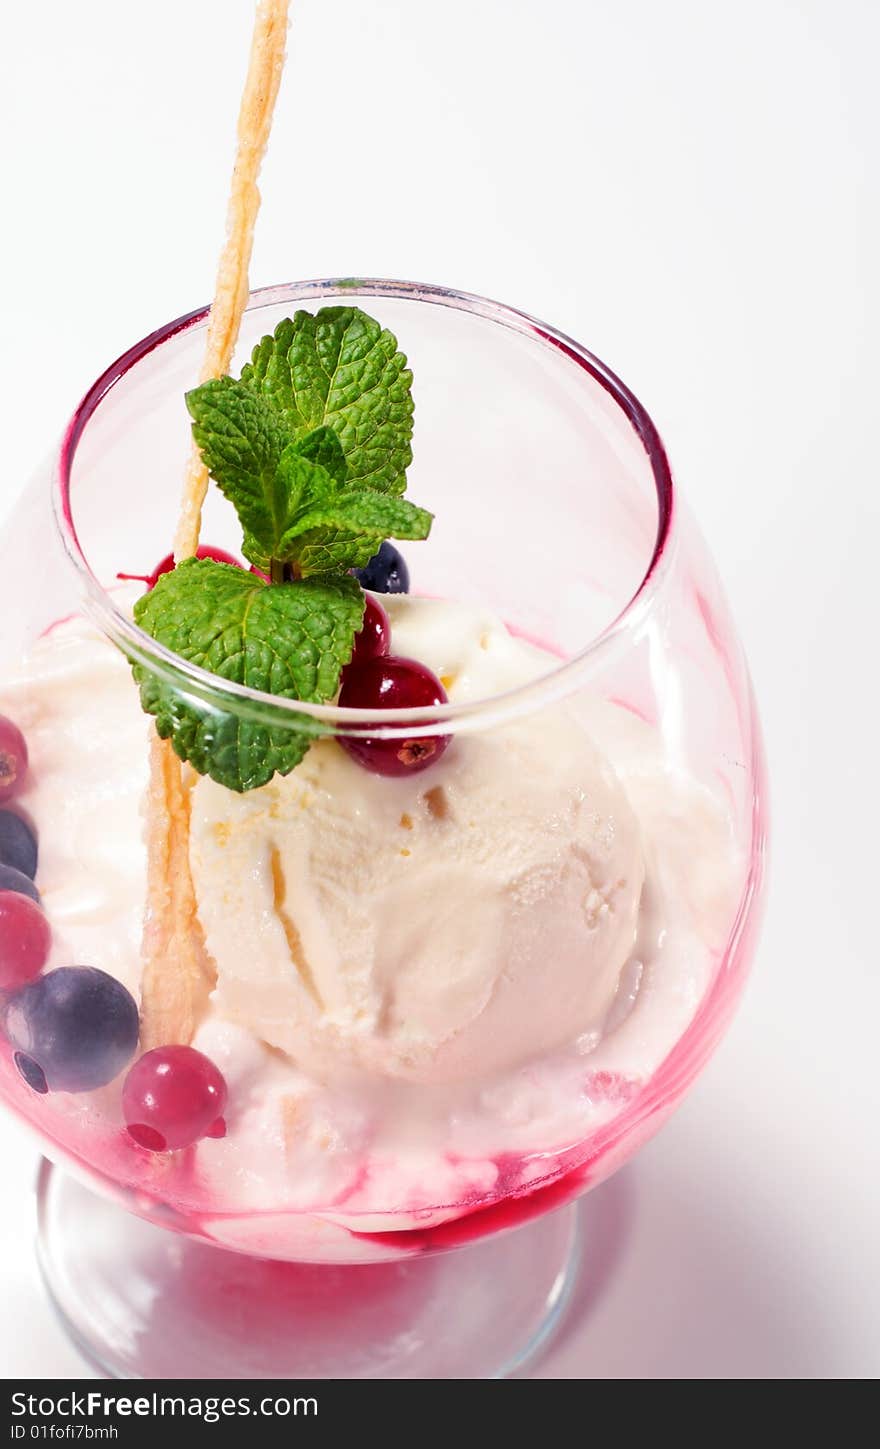 Ice Cream with Fresh Mint Leaves and Berries in Glass. Ice Cream with Fresh Mint Leaves and Berries in Glass